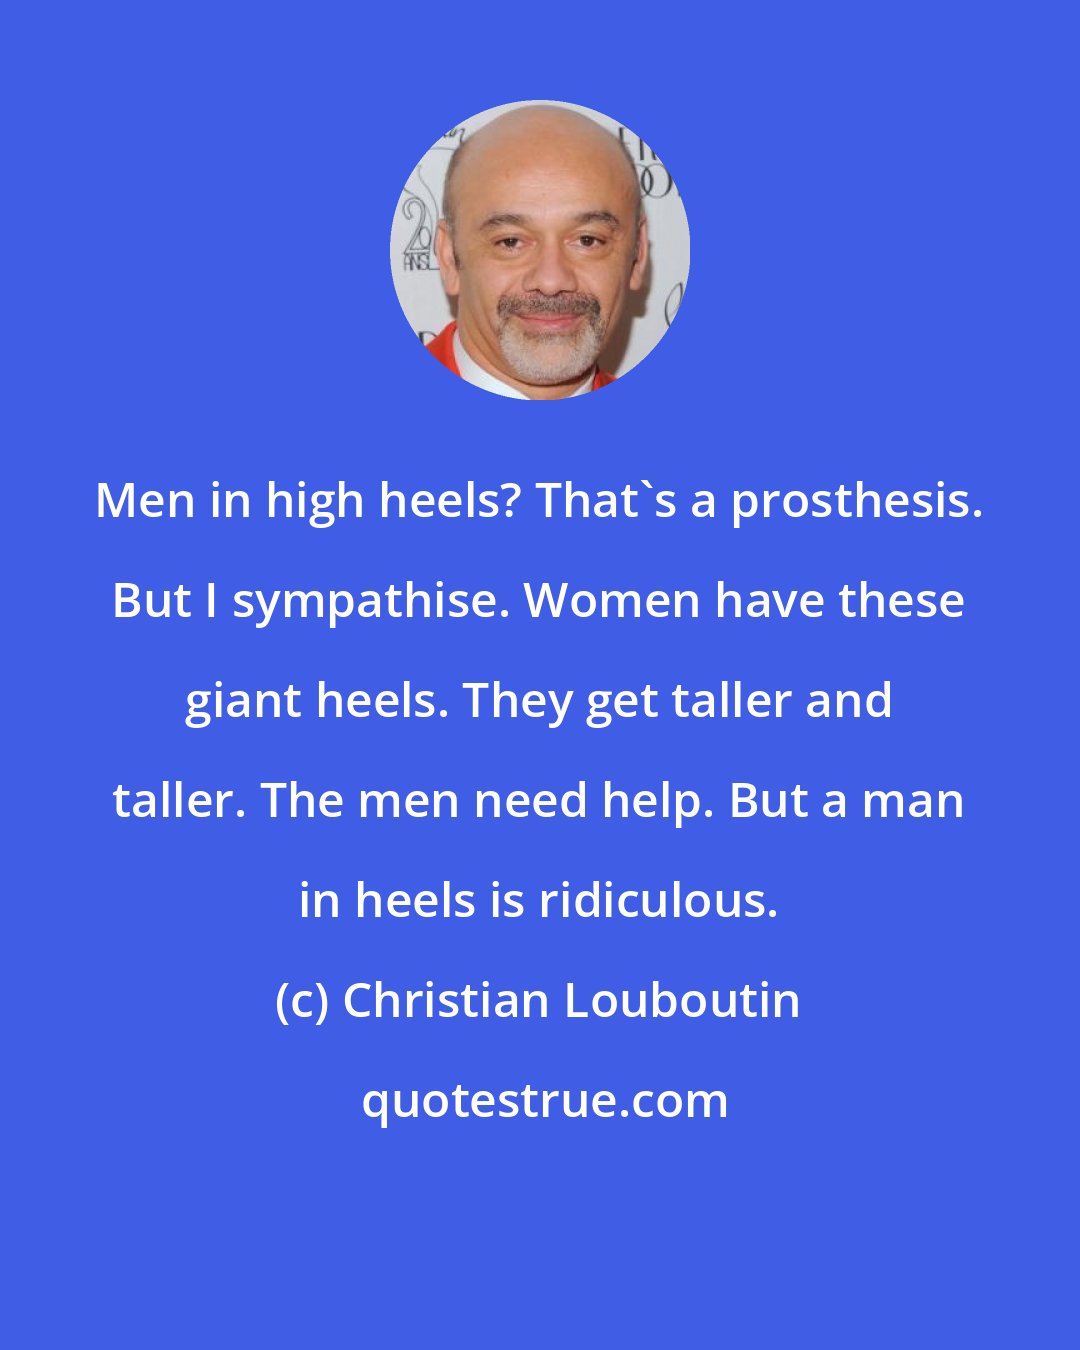 Christian Louboutin: Men in high heels? That's a prosthesis. But I sympathise. Women have these giant heels. They get taller and taller. The men need help. But a man in heels is ridiculous.